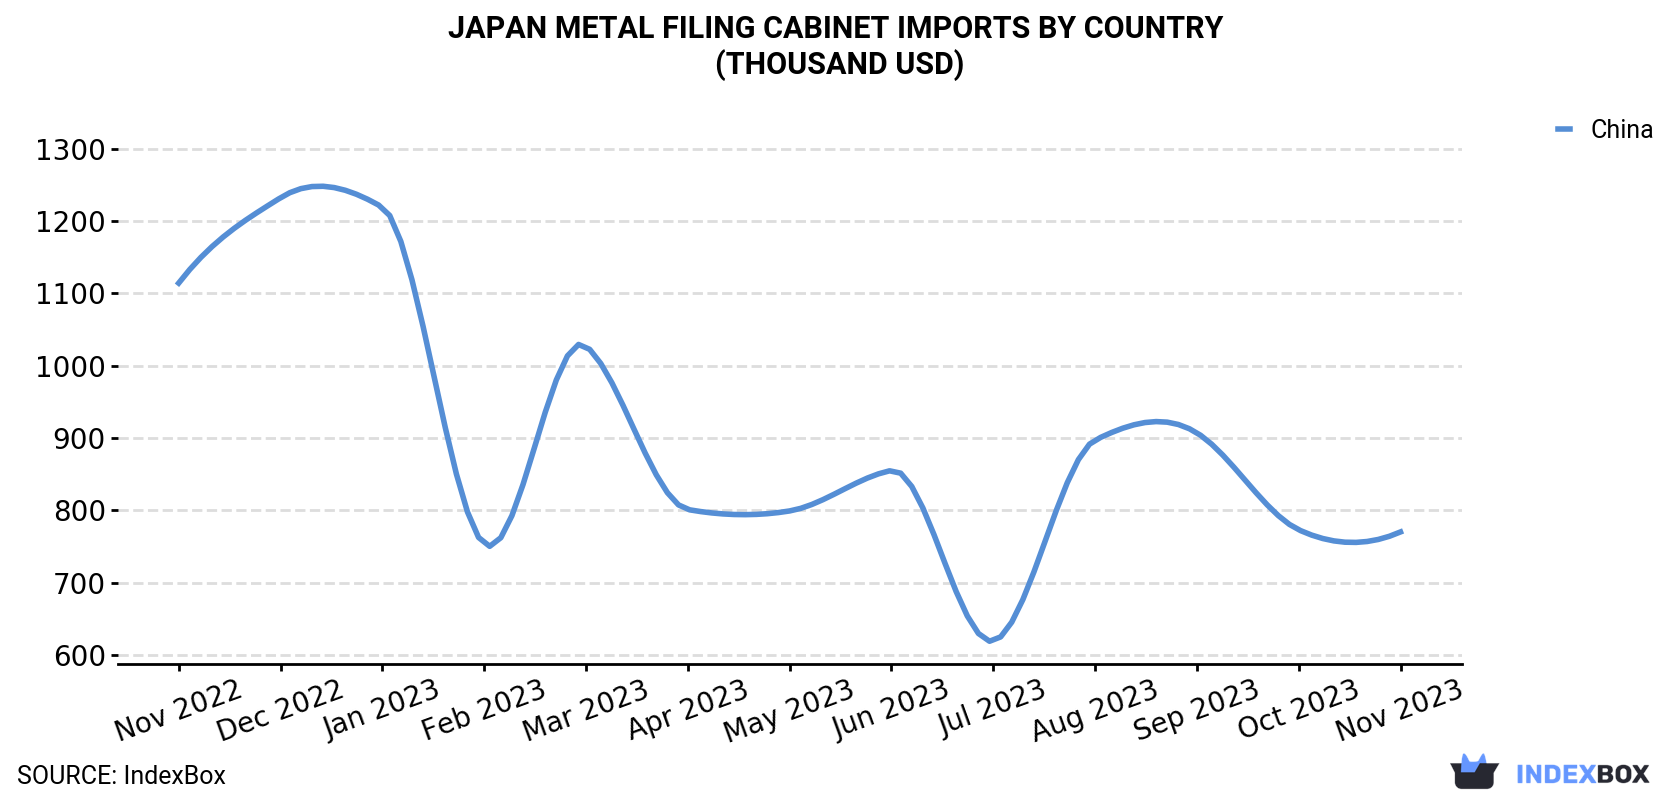 Japan Metal Filing Cabinet Imports By Country (Thousand USD)